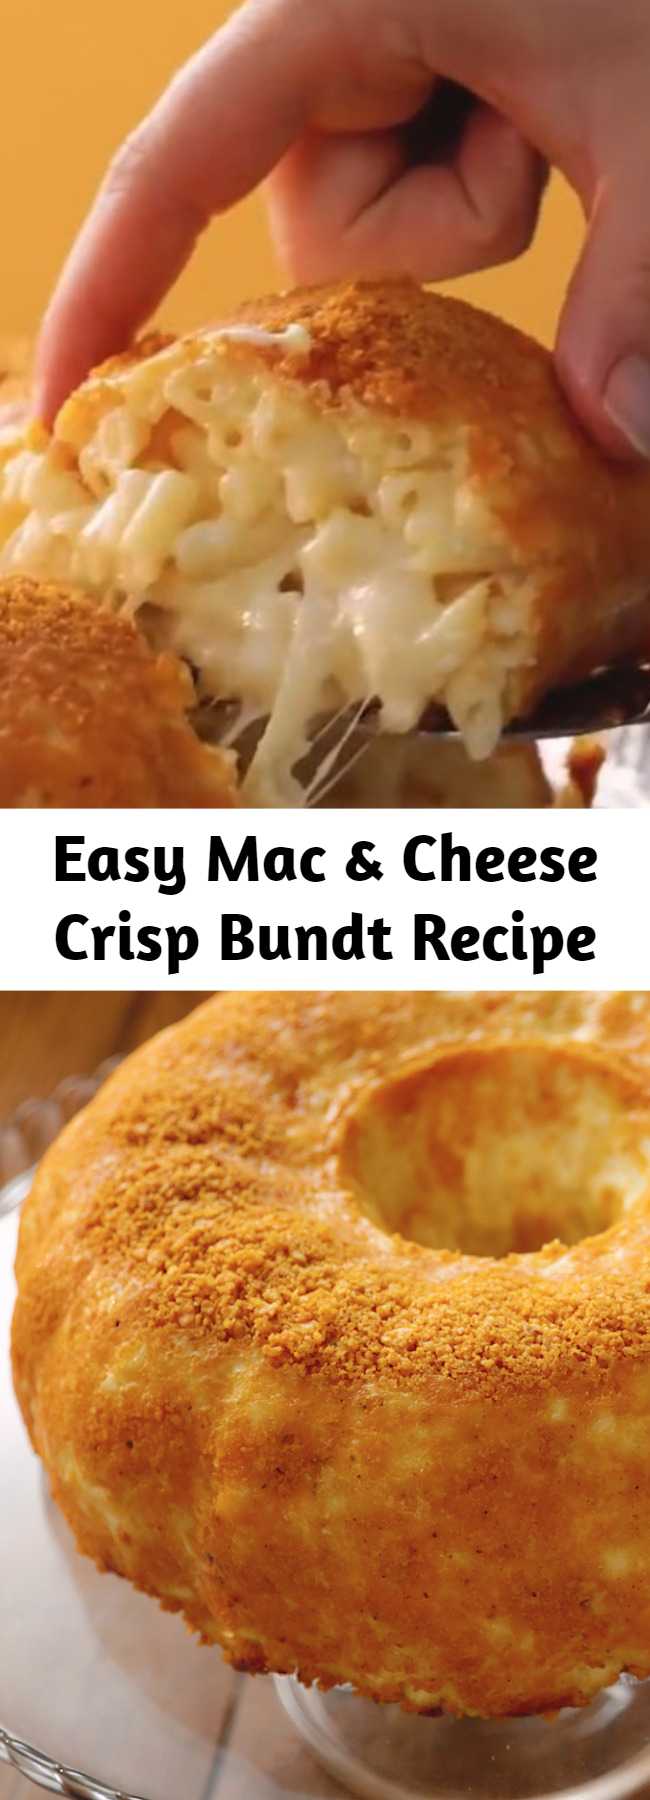 Easy Mac & Cheese Crisp Bundt Recipe - For all the savoury lovers out there, we've made your perfect birthday cake! Mac and cheese with an extra layer of cheese surrounded in a crispy Dorito shell... Talk about a perfect cake.